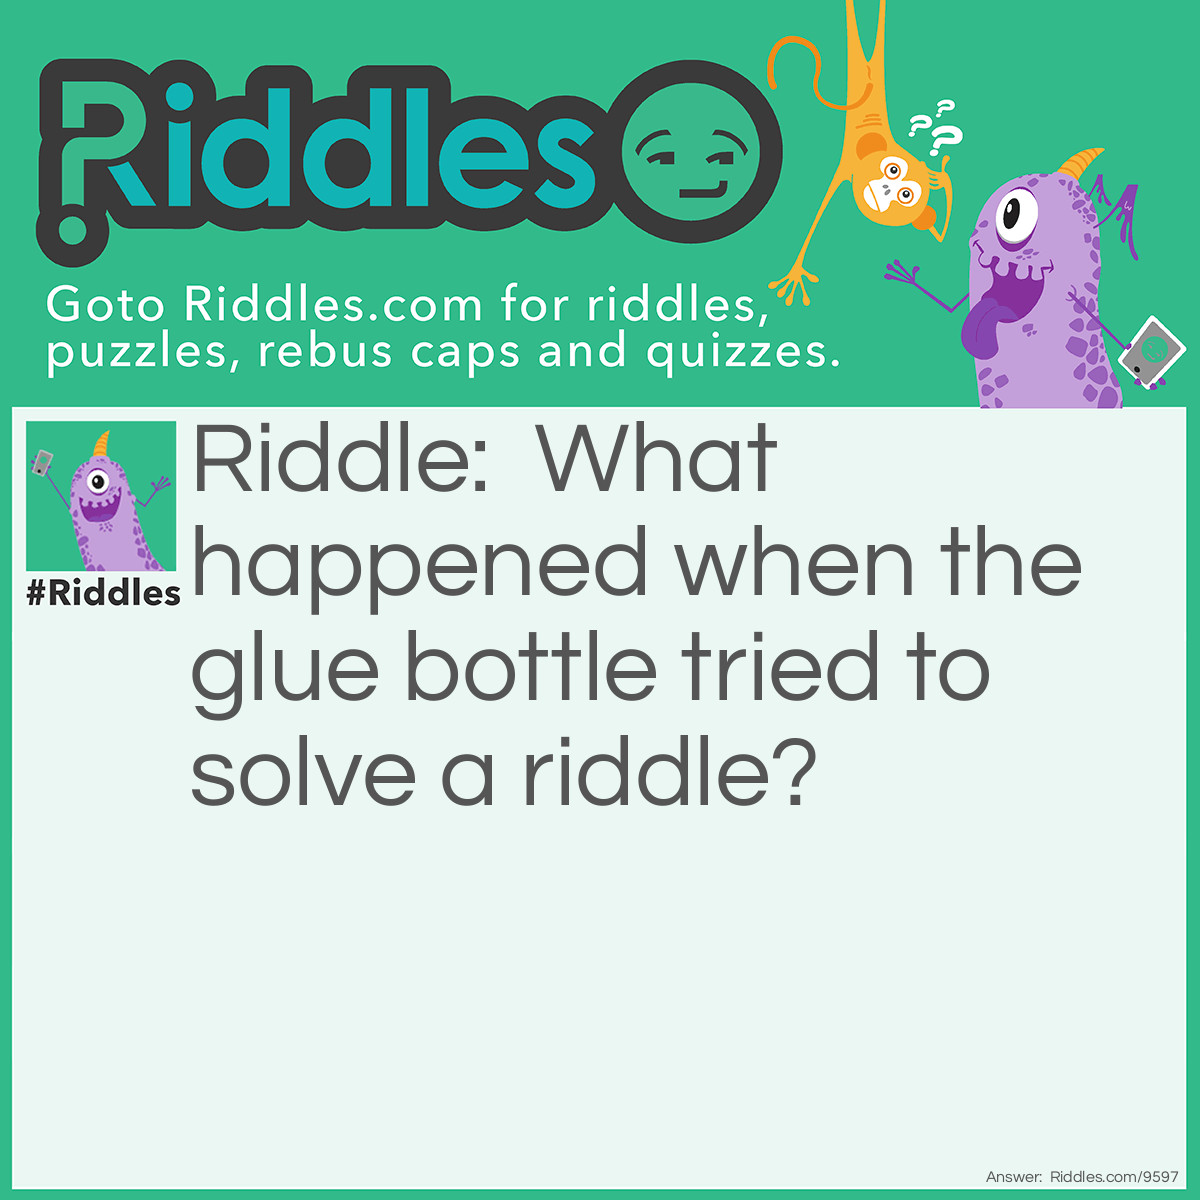 Riddle: What happened when the glue bottle tried to solve a <a href="https://www.riddles.com">riddle</a>? Answer: He got stuck!